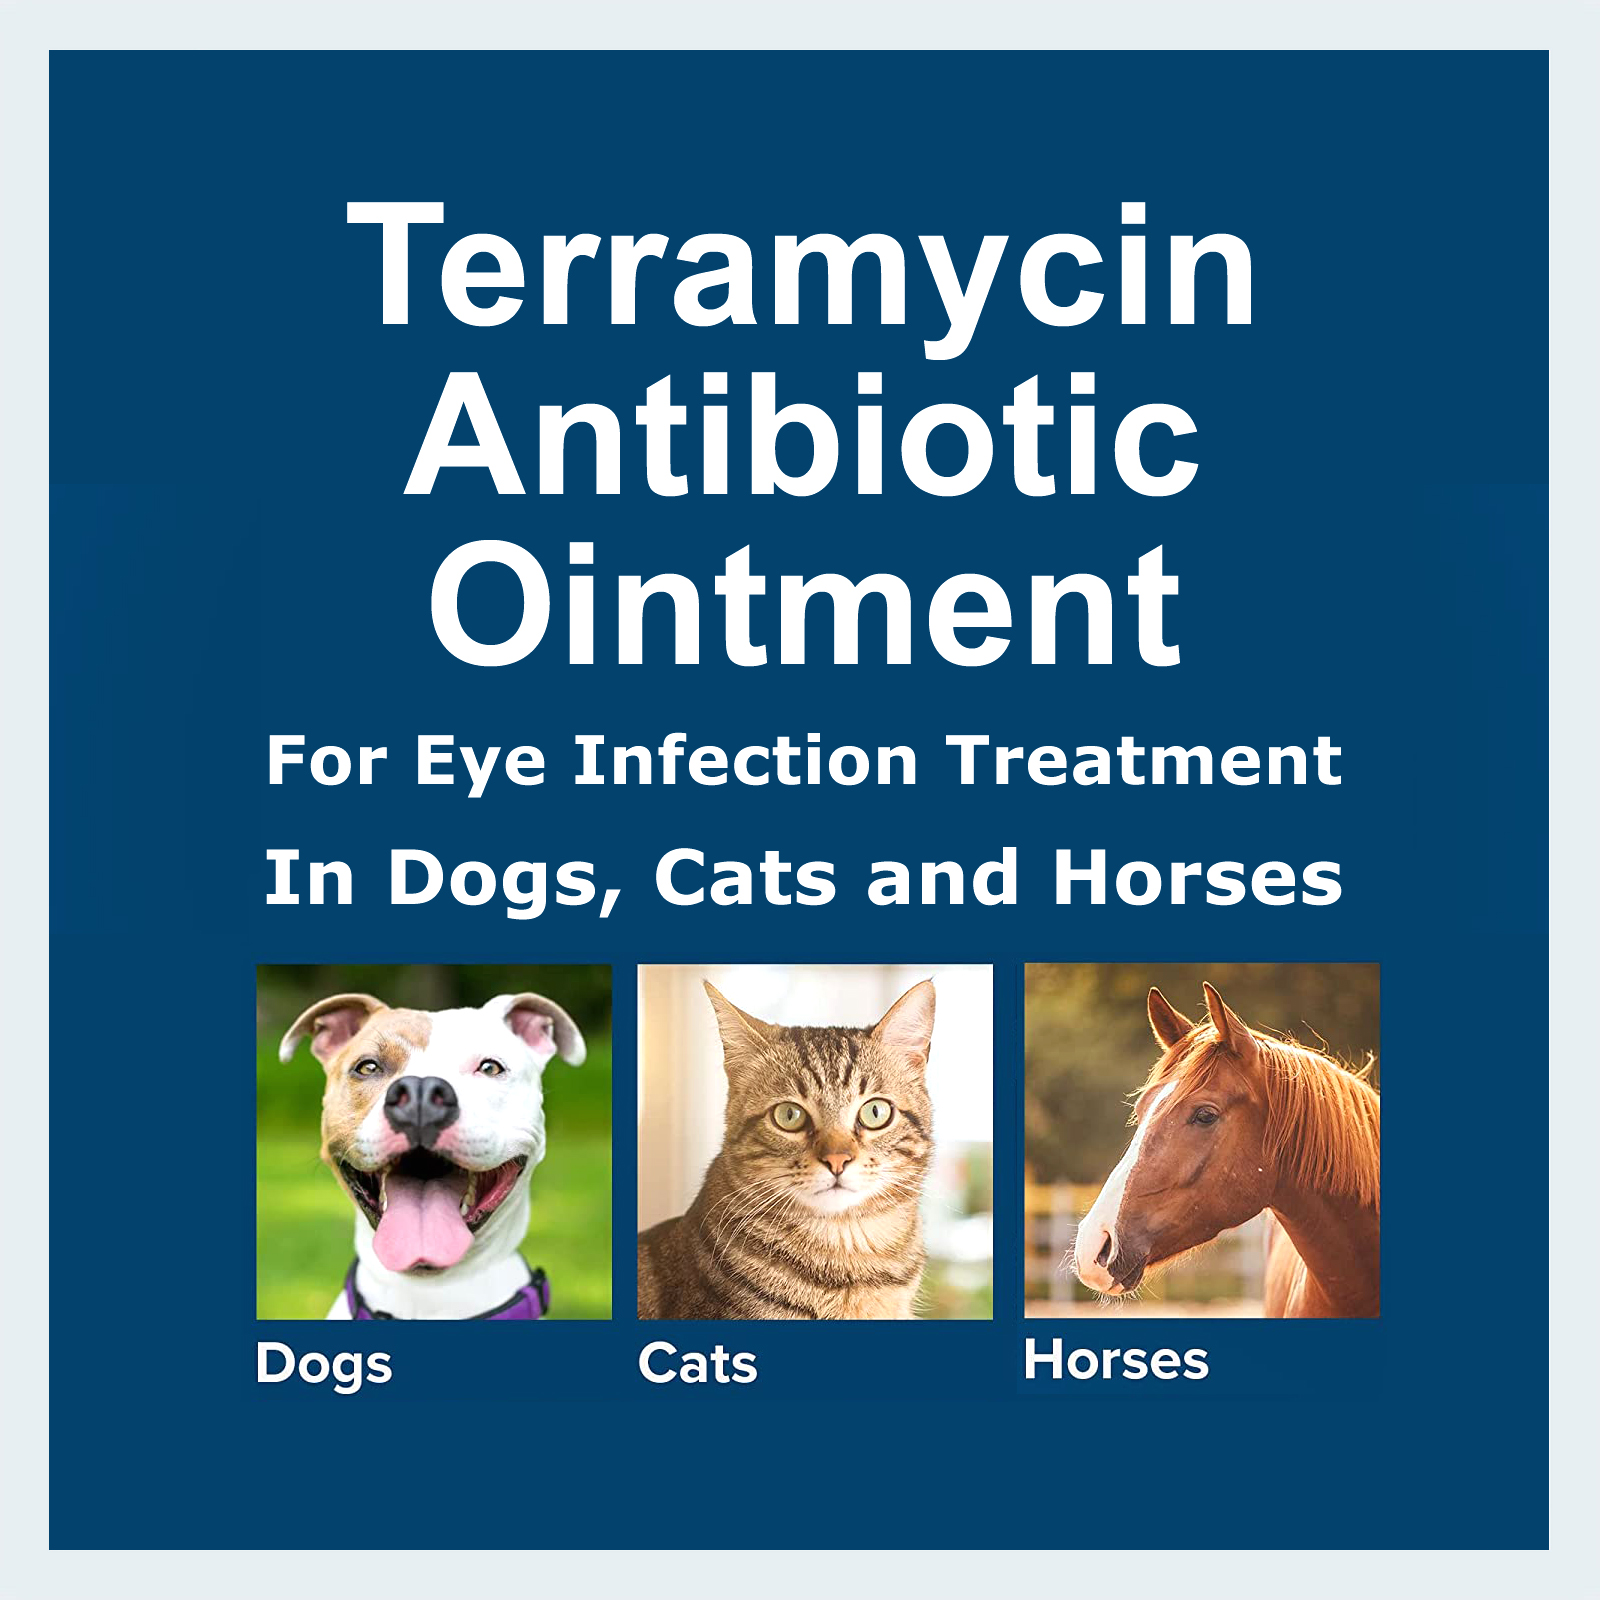 Terramycin Antibiotic Ointment for Eye Infection Treatment in Dogs Cats and Horses